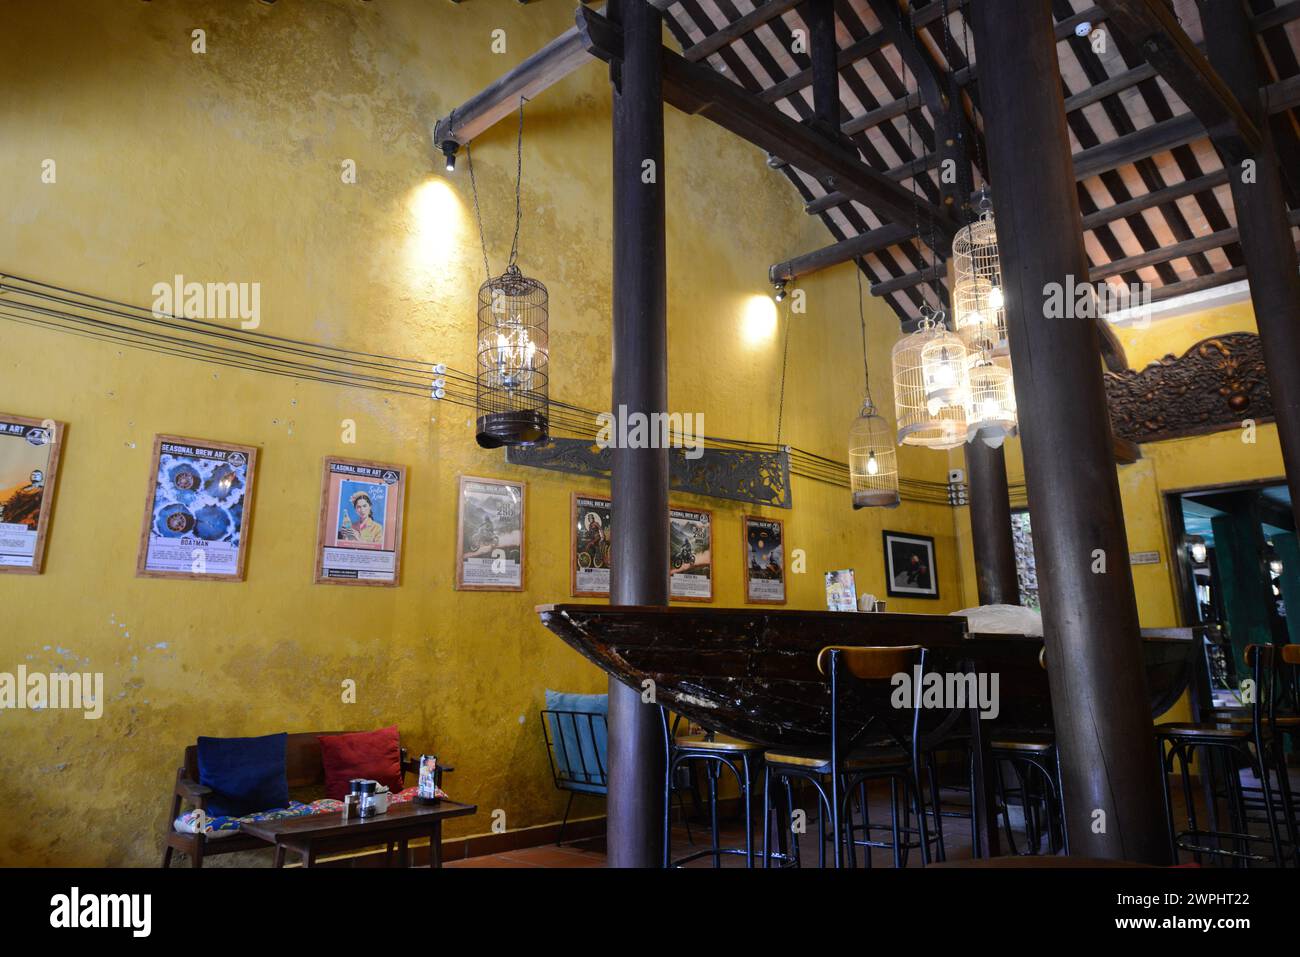 The interior of the 7 Bridges craft beer taproom in the old city of Hoi An, Vietnam. Stock Photo